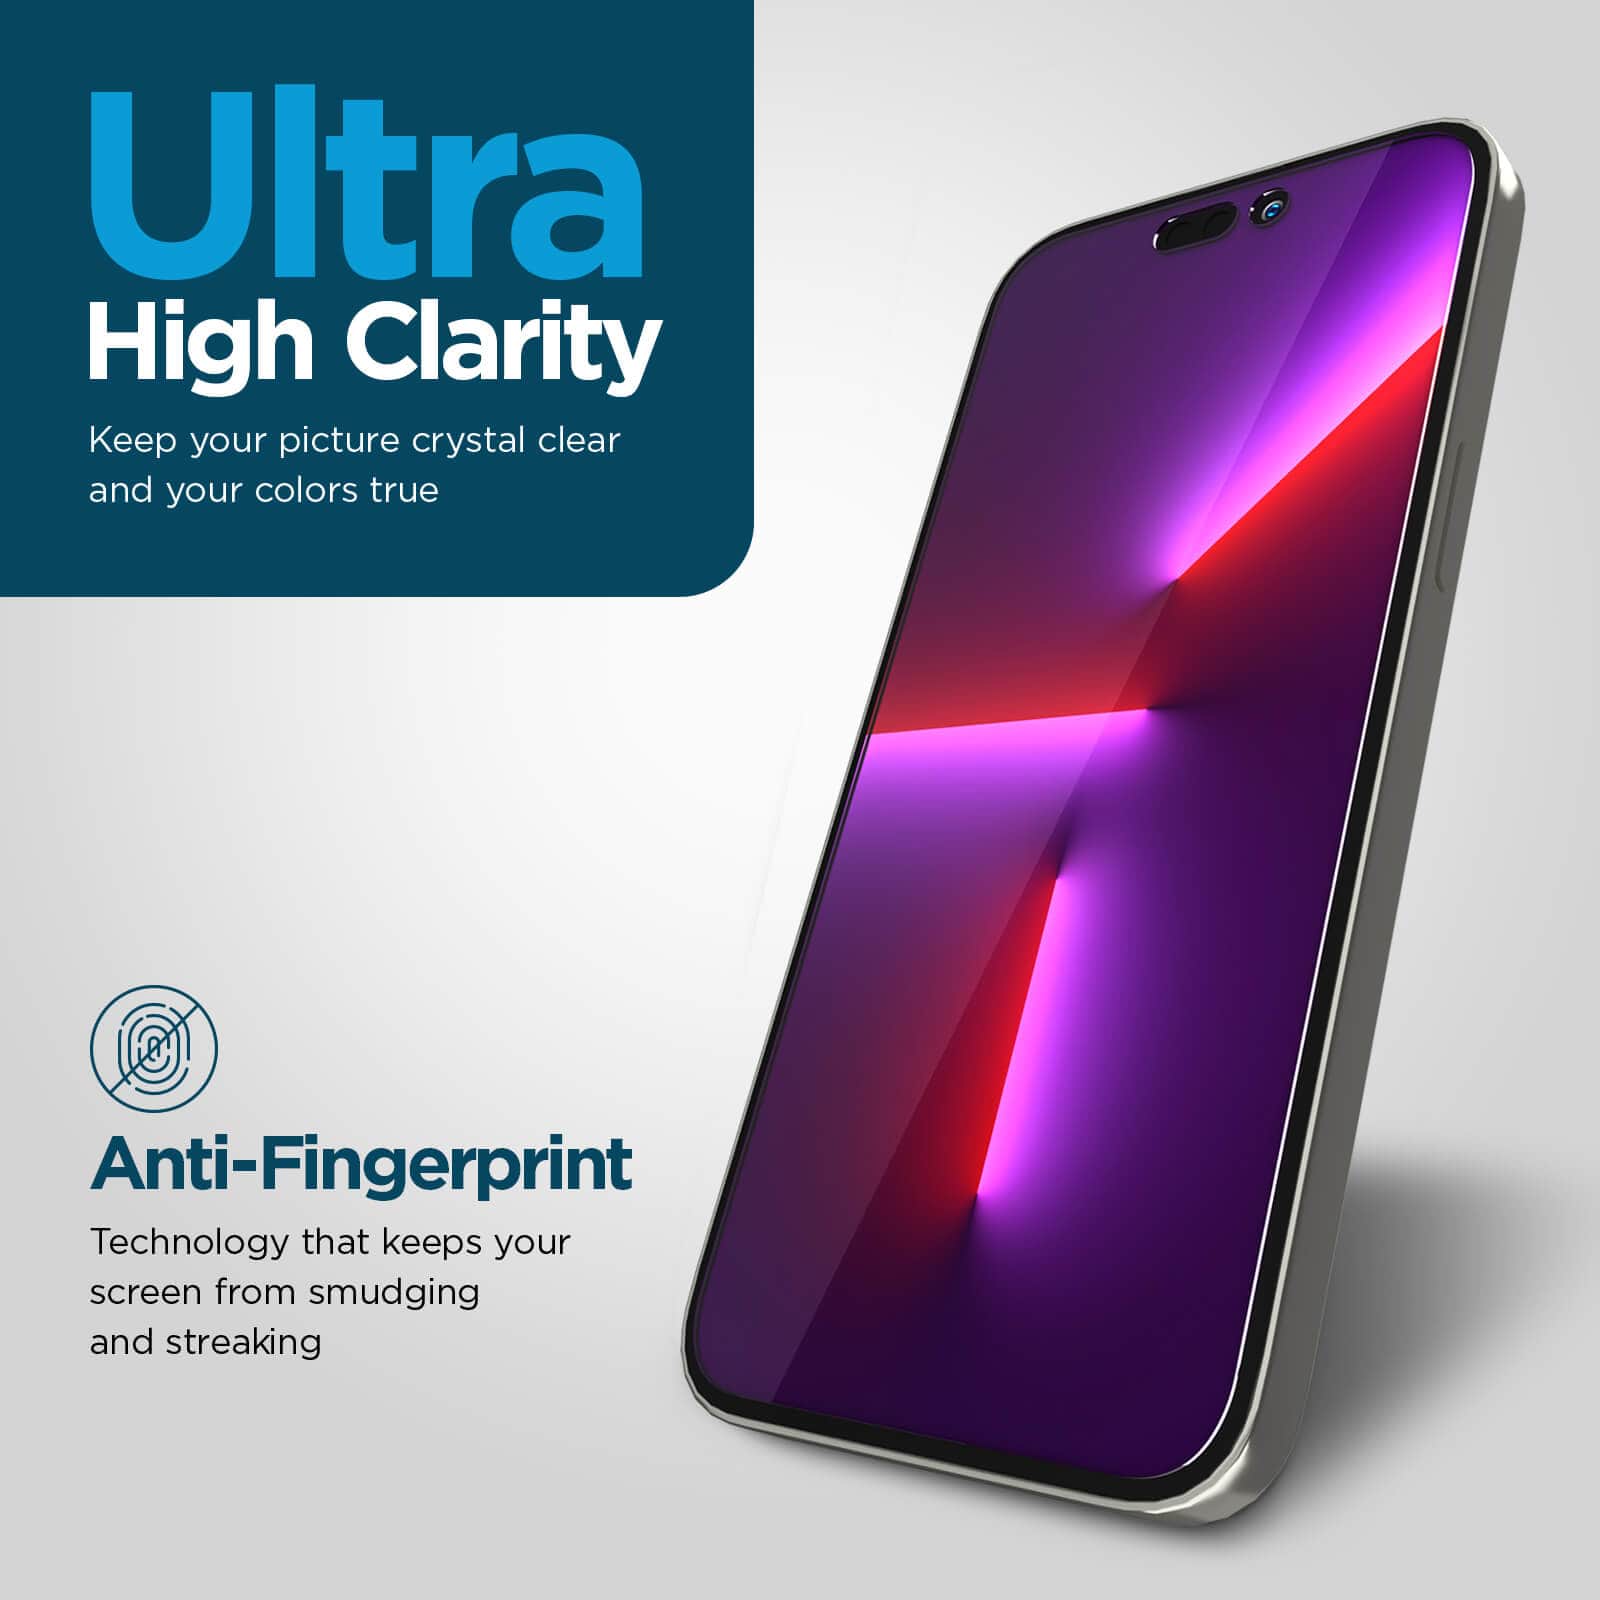 Ultra high clarity. Keeps your picture crystal clear and your colors true. Anti0Fingerprint technology that keeps your screen from smudging and streaking. color::Clear